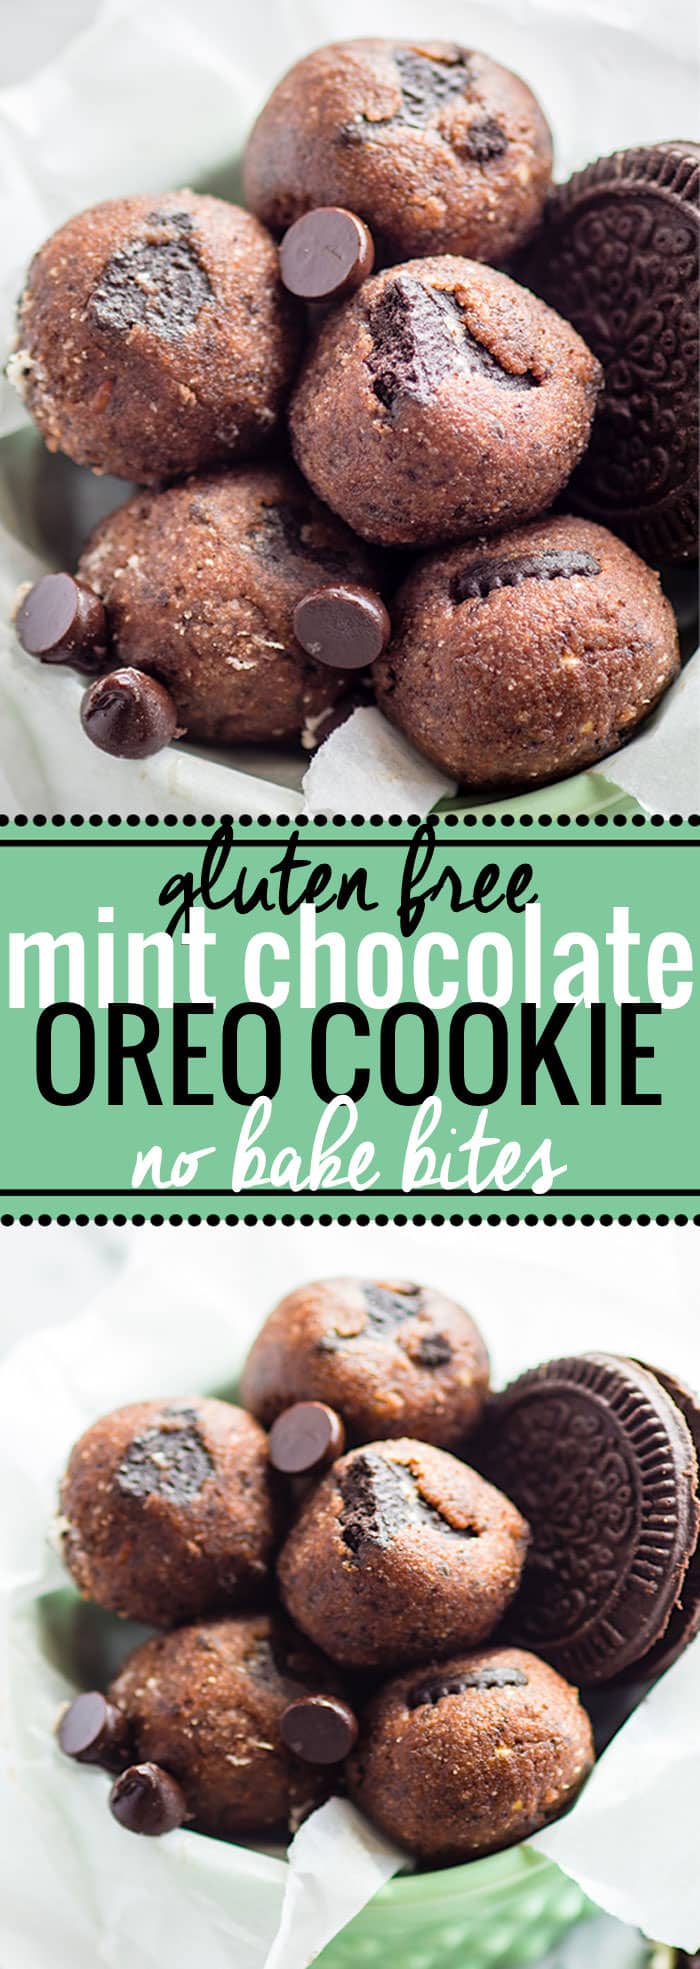 No Bake Mint Chocolate Chip Oreo Cookie Bites! Gluten Free and vegan friendly No bake cookie bites that make for the perfect no bake healthy dessert or snack alternative. Kid friendly, refreshing, delicious, and simple to make! @cottercrunch